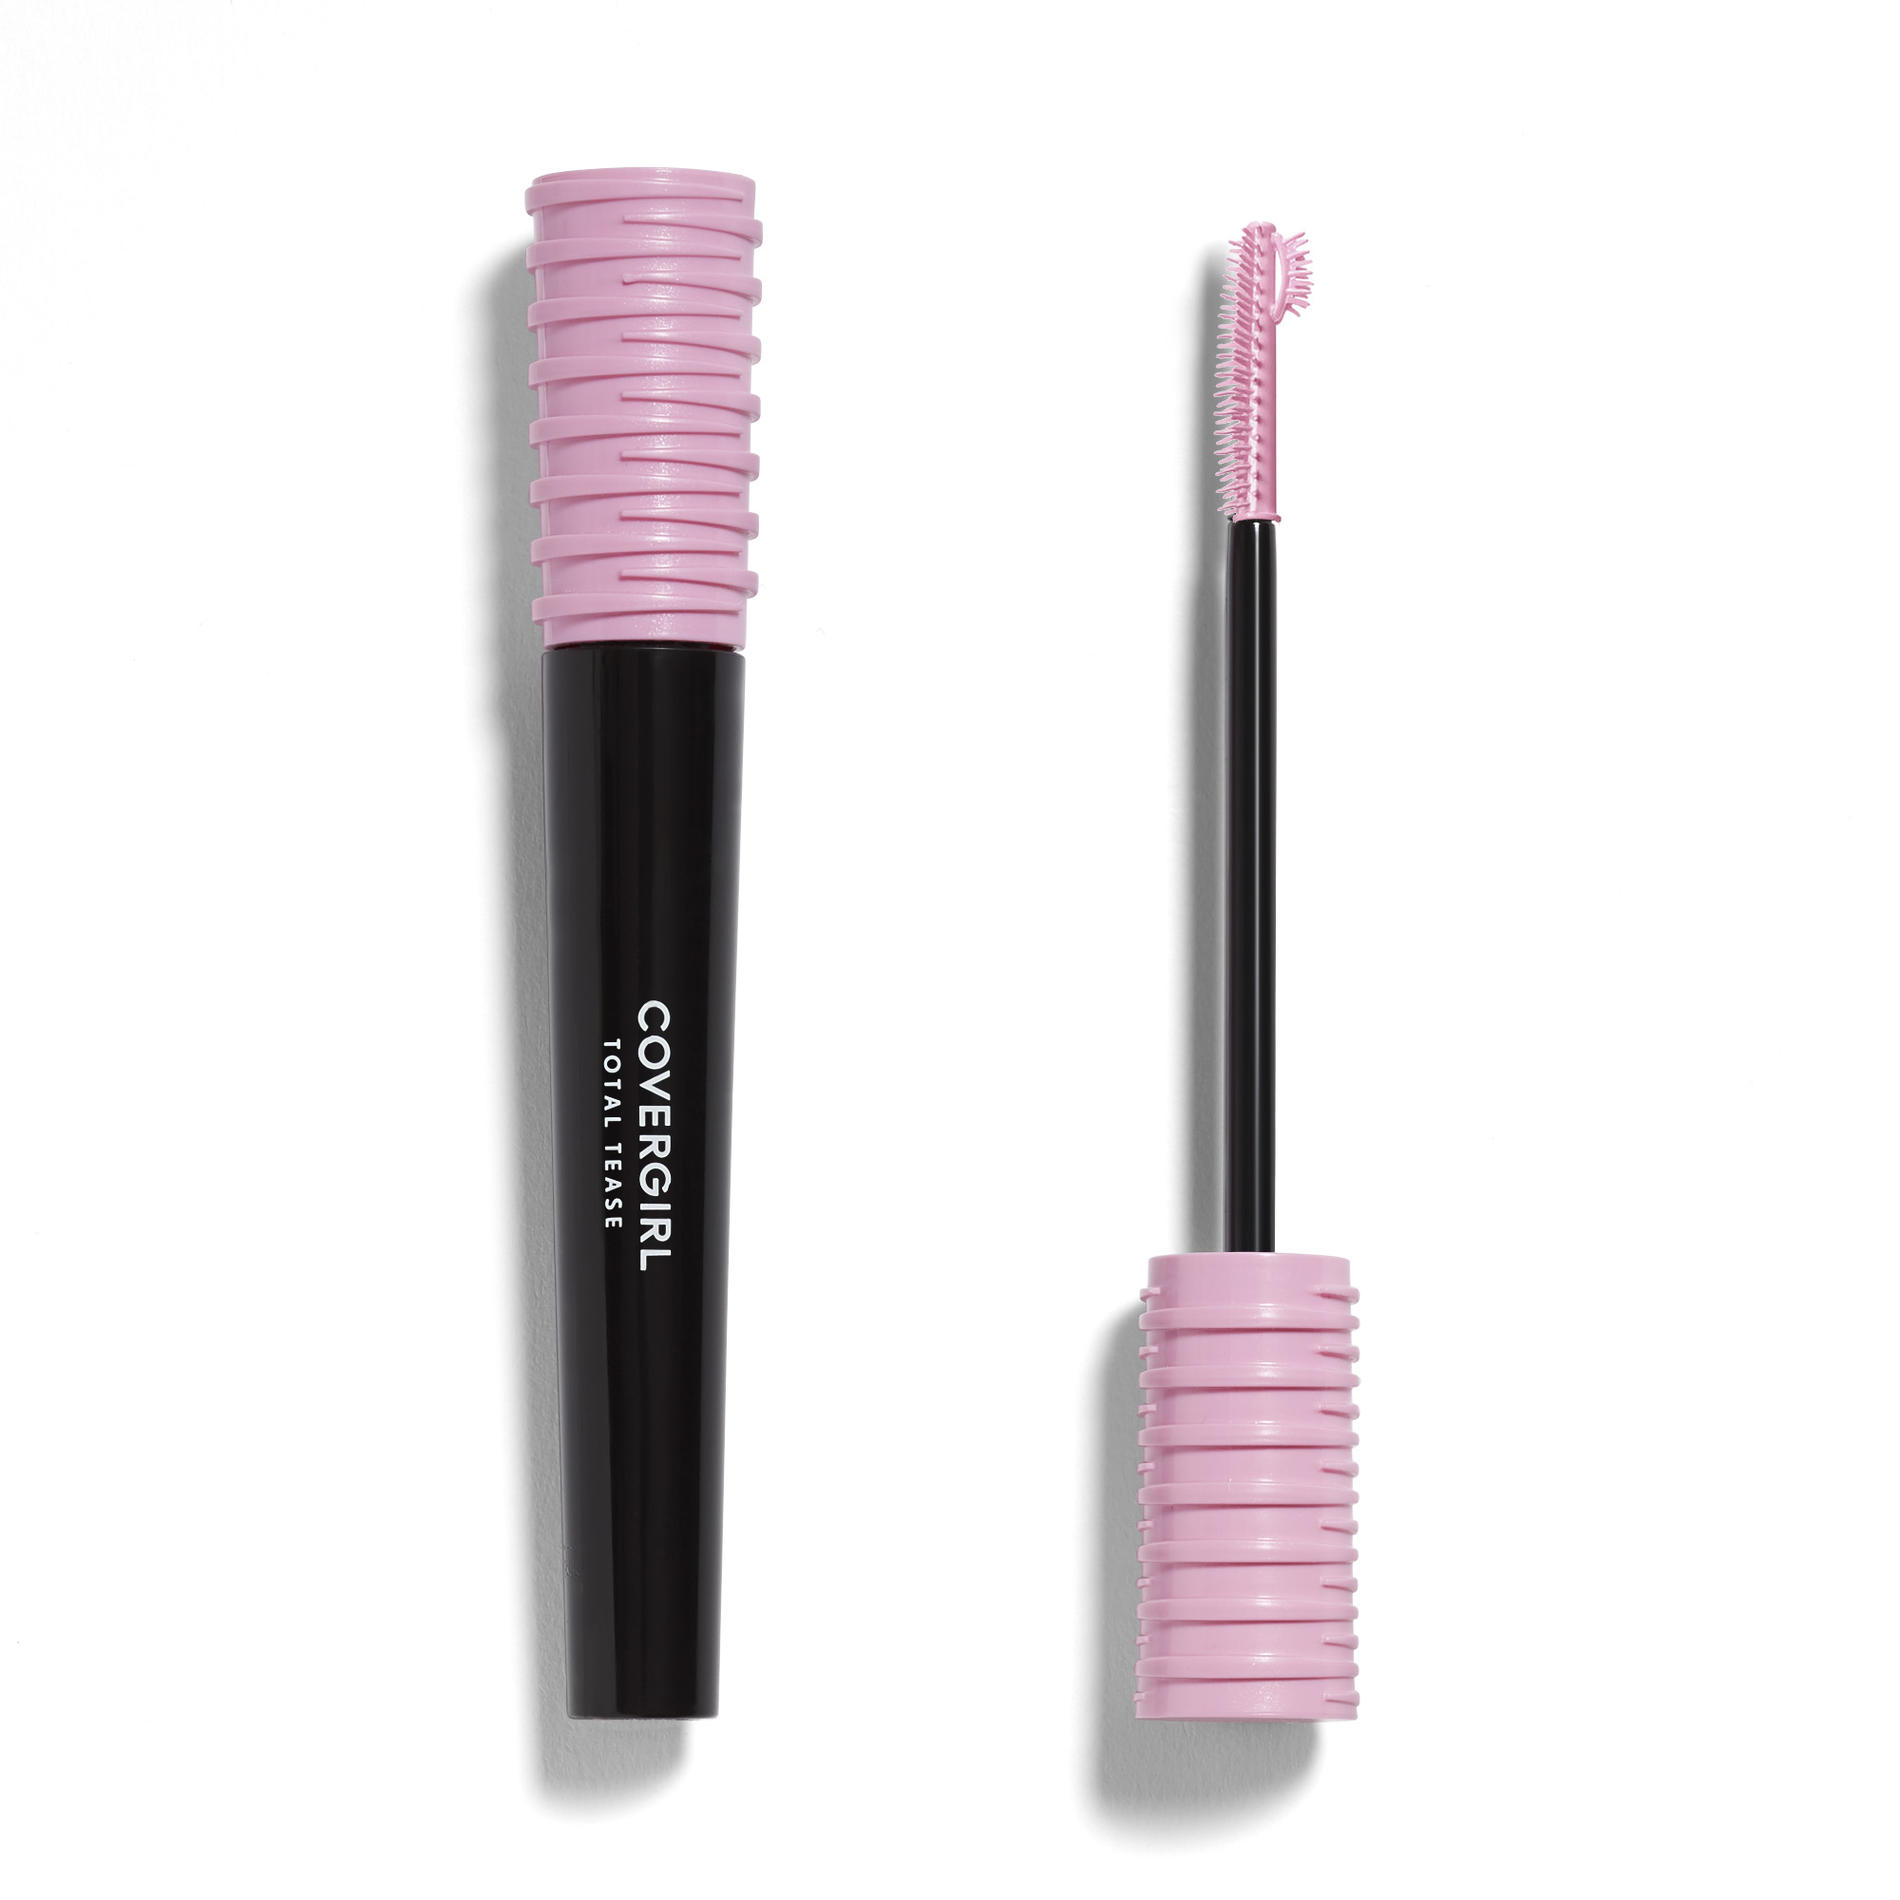 COVERGIRL Total Tease Full + Long + Refined Mascara, 100 Very Black, 0.21 oz - image 1 of 5